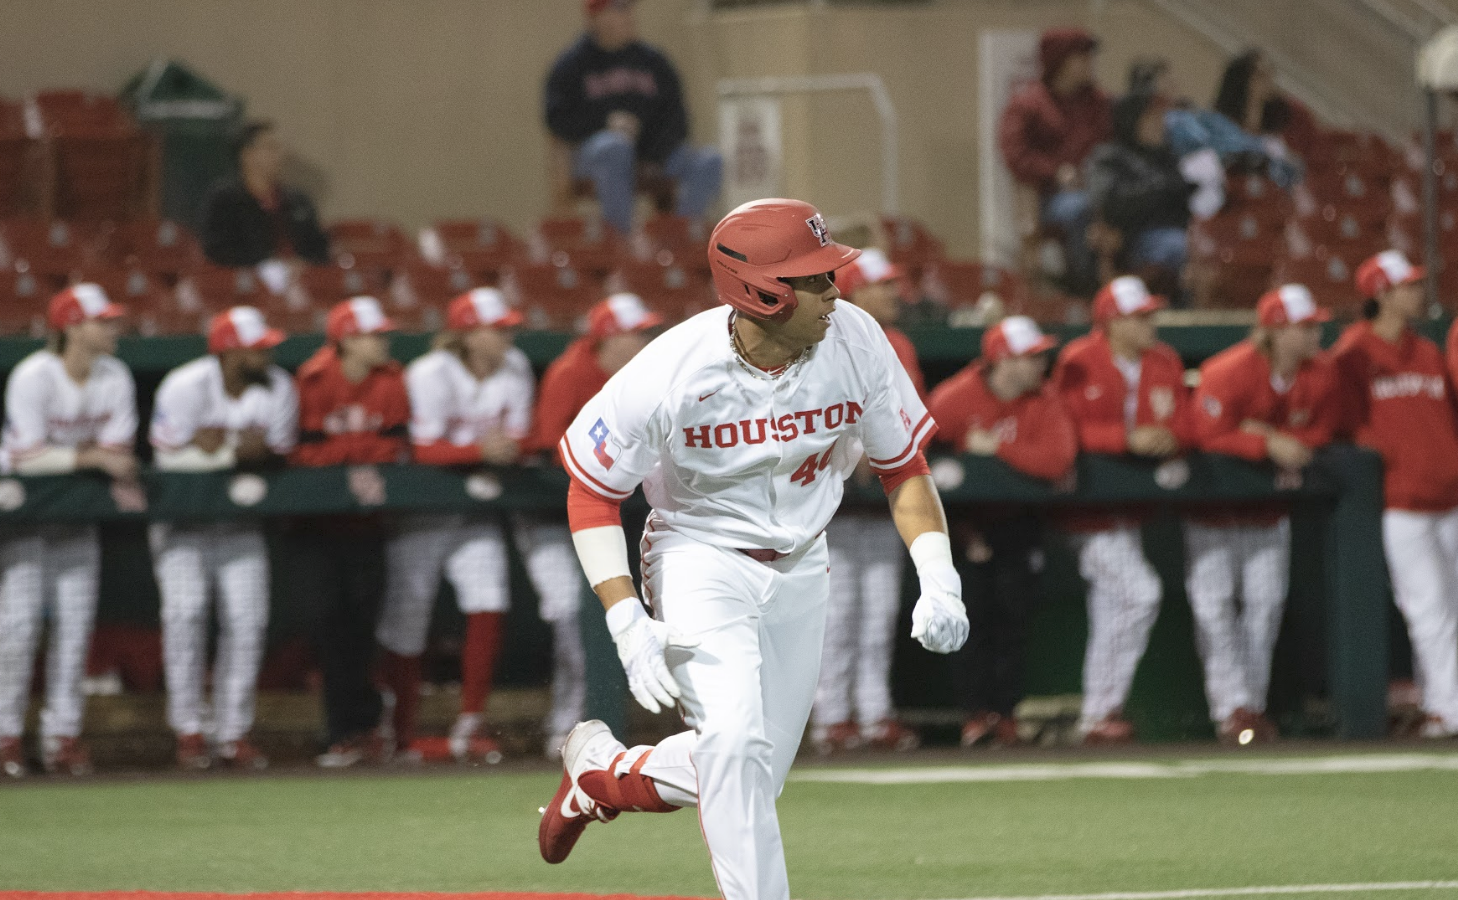  Junior first baseman Ryan Hernandez scored three runs and batted 3 for 3 in Houston's 7-3 win over Youngstown State on Friday night at Schroeder Park.